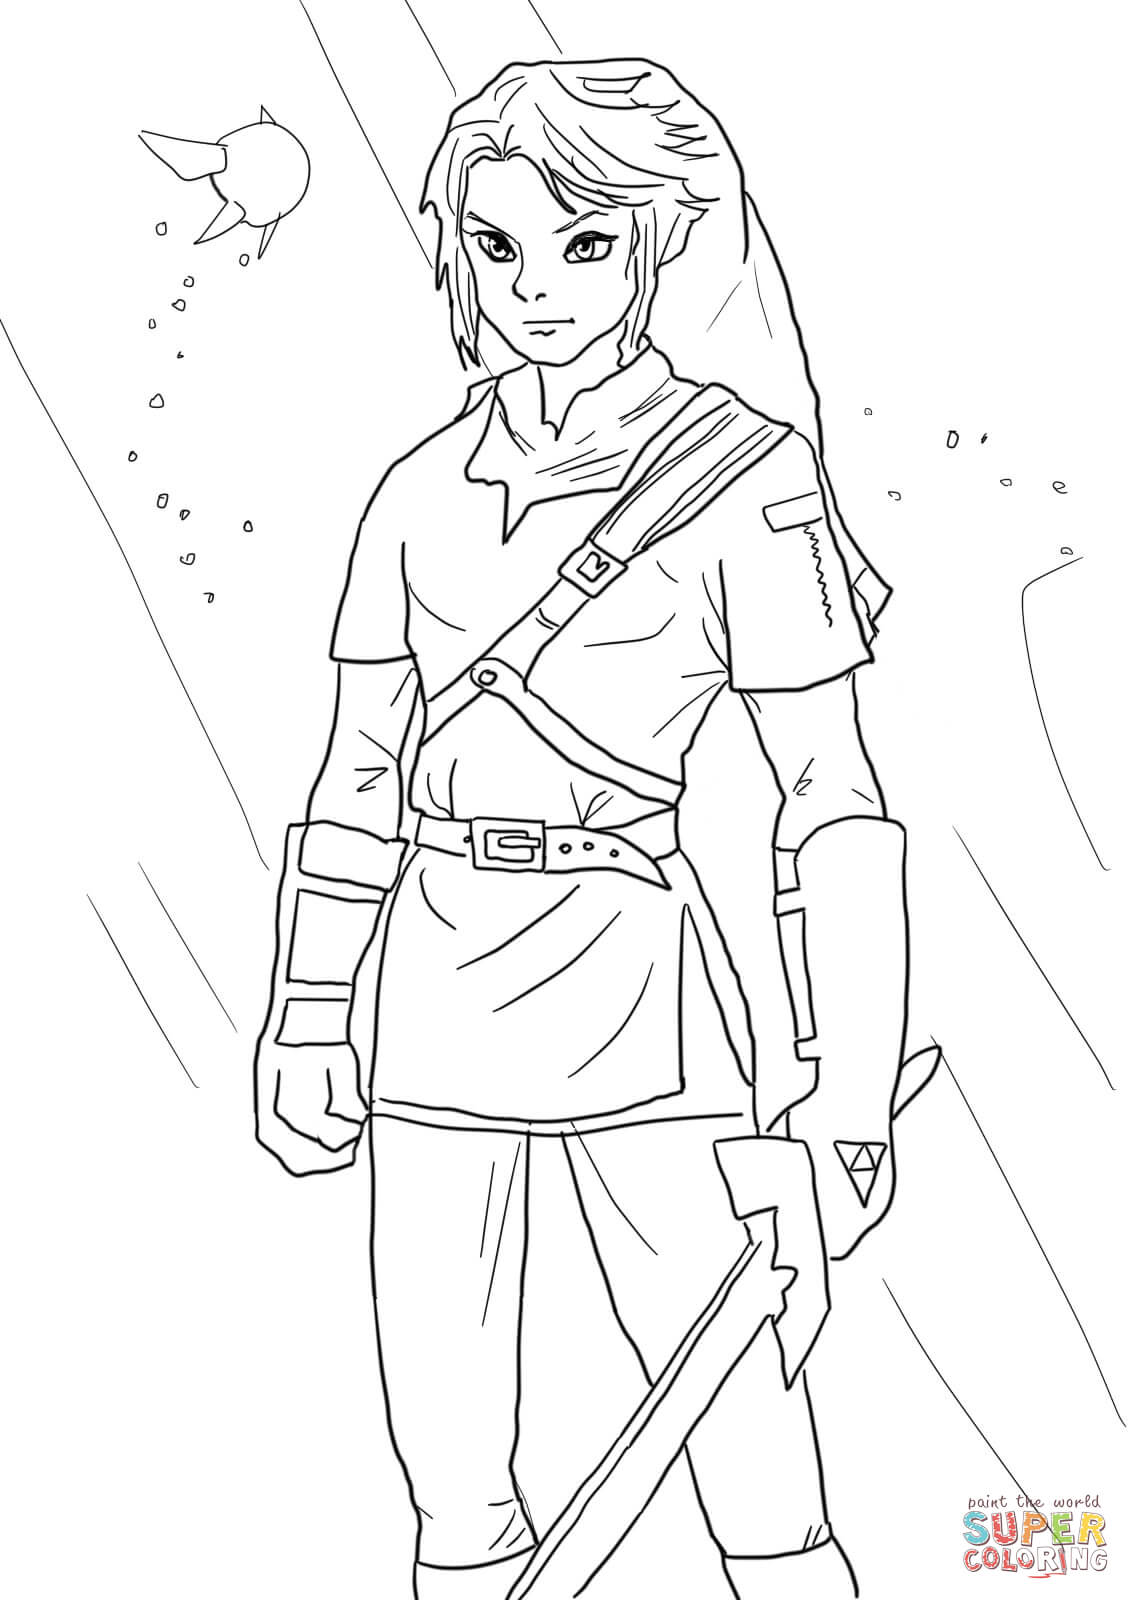 Link from Legend of Zelda coloring page | Free Printable Coloring Pages